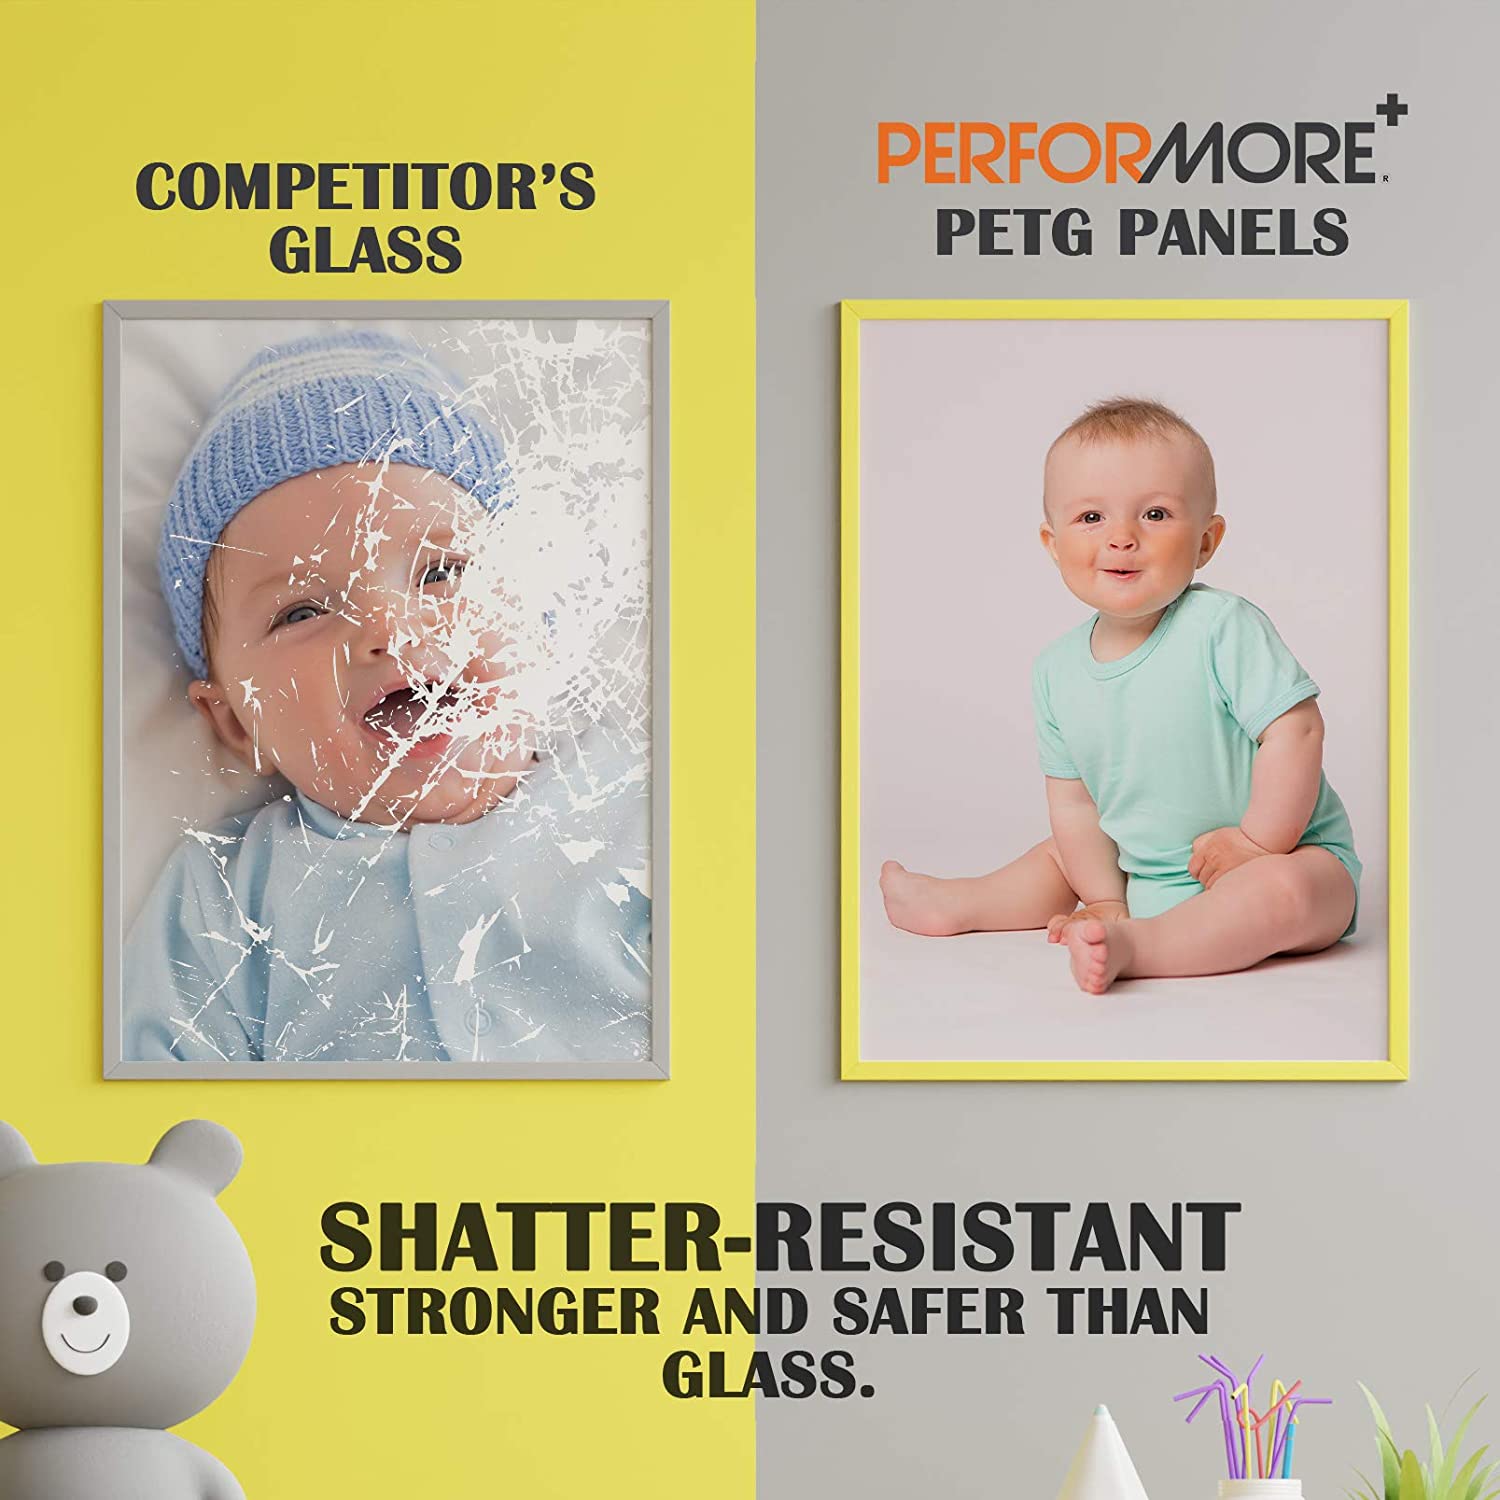 5 x 7 Inch PETG Sheet Plexiglass Panels - 0.04 inch Thick Clear Polystyrene Plastic Sheet with Protective Film - Pack of 5